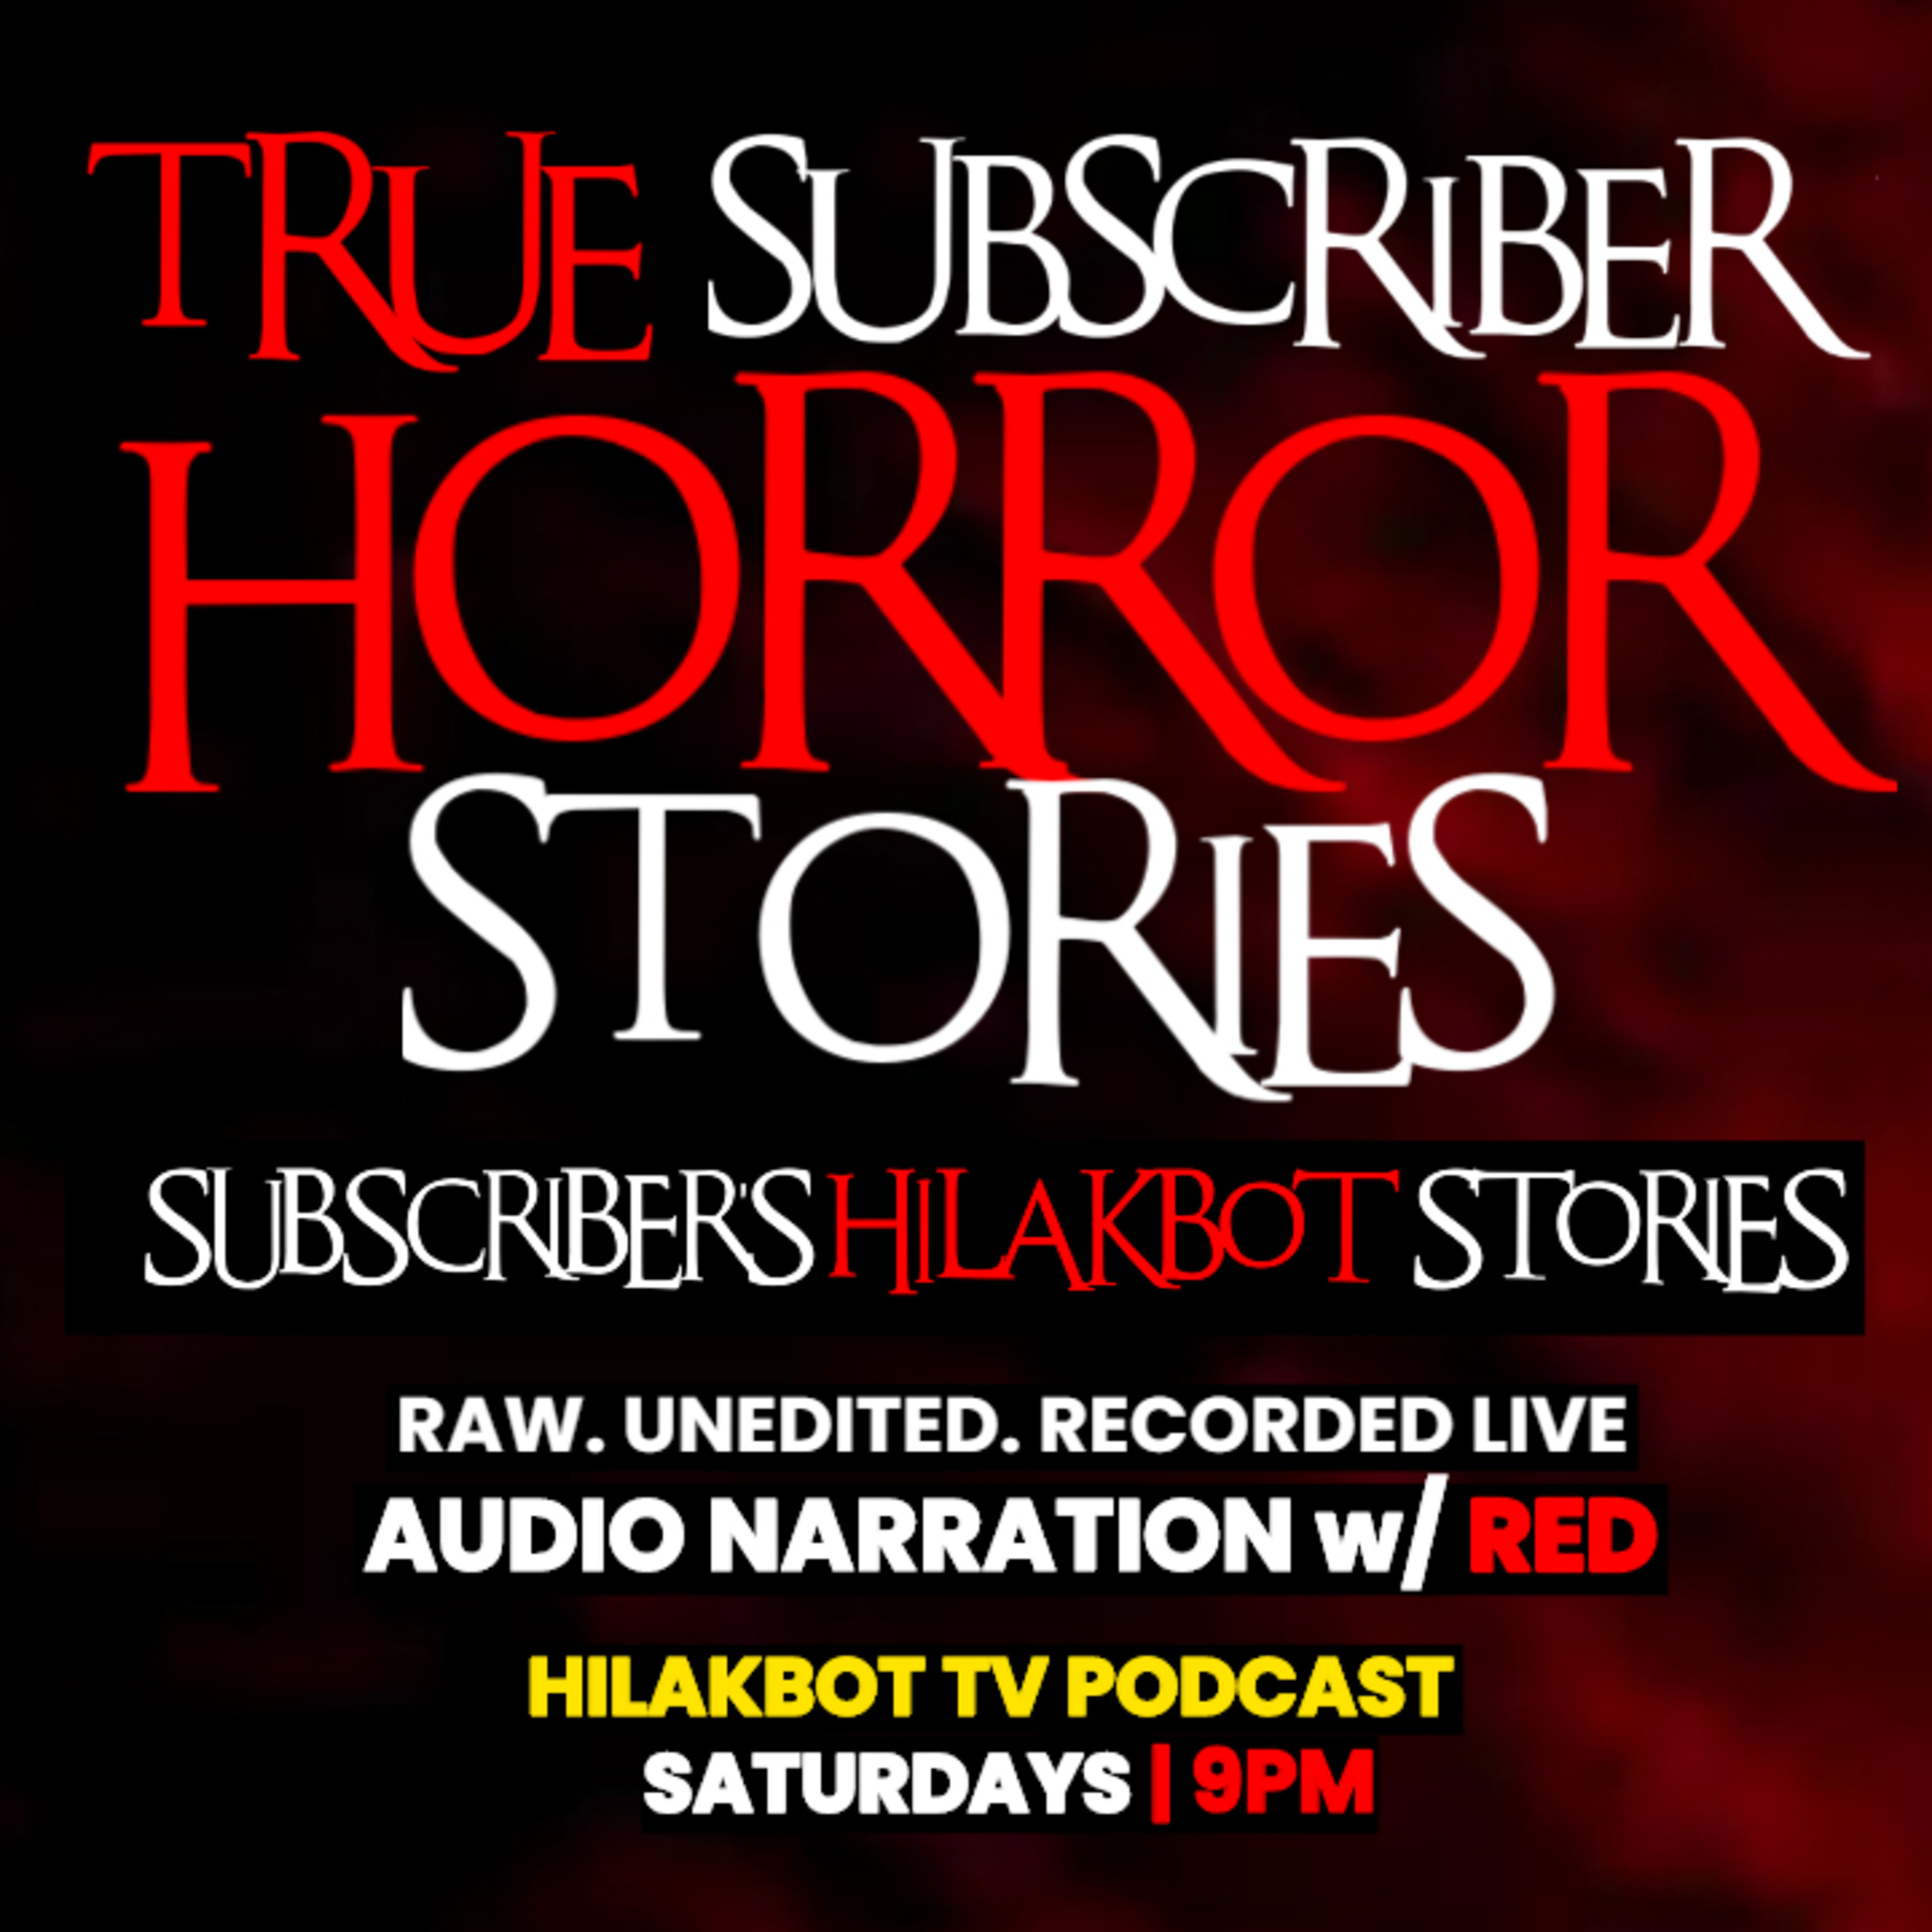 SUBSCRIBER'S HILAKBOT STORIES EPISODE 32 - Live Narration w/ RED | Listener's Submitted True Scary Stories